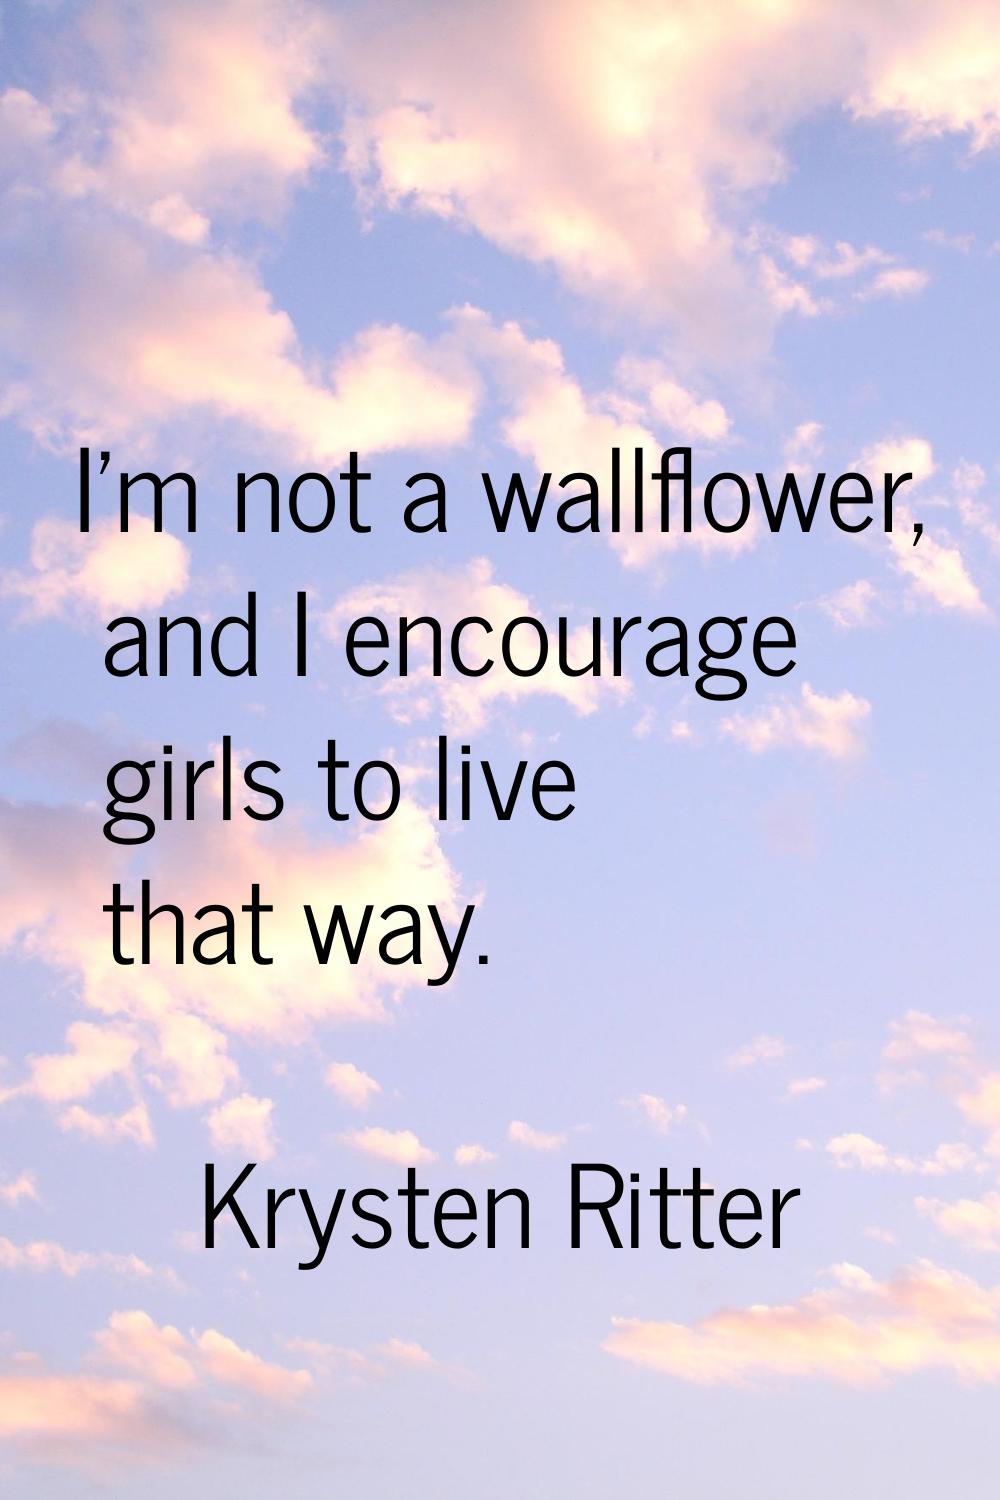 I'm not a wallflower, and I encourage girls to live that way.